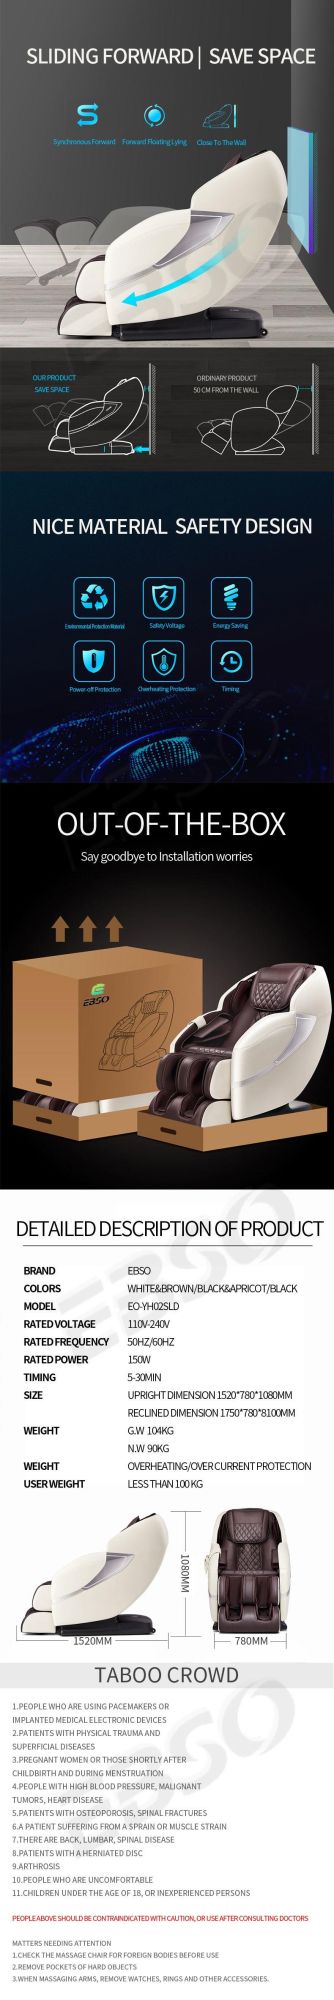 Factory Sale Various Widely Used Prime Comfort Massage Chair with Competitive Price